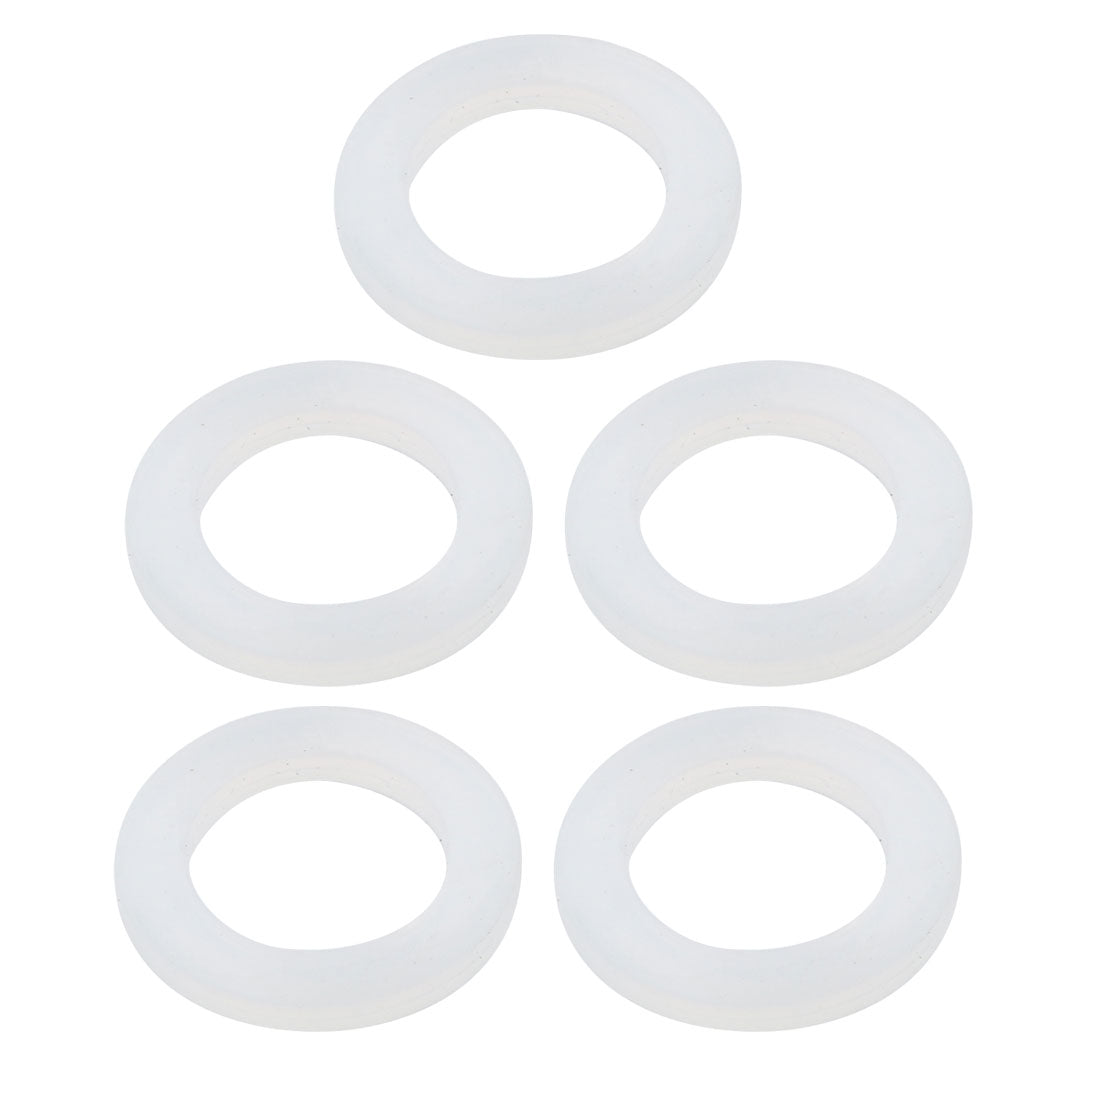 uxcell Uxcell 5pcs Clear Silicone Round Flat Washer Assortment Size 21x31x3mm Flat Washer